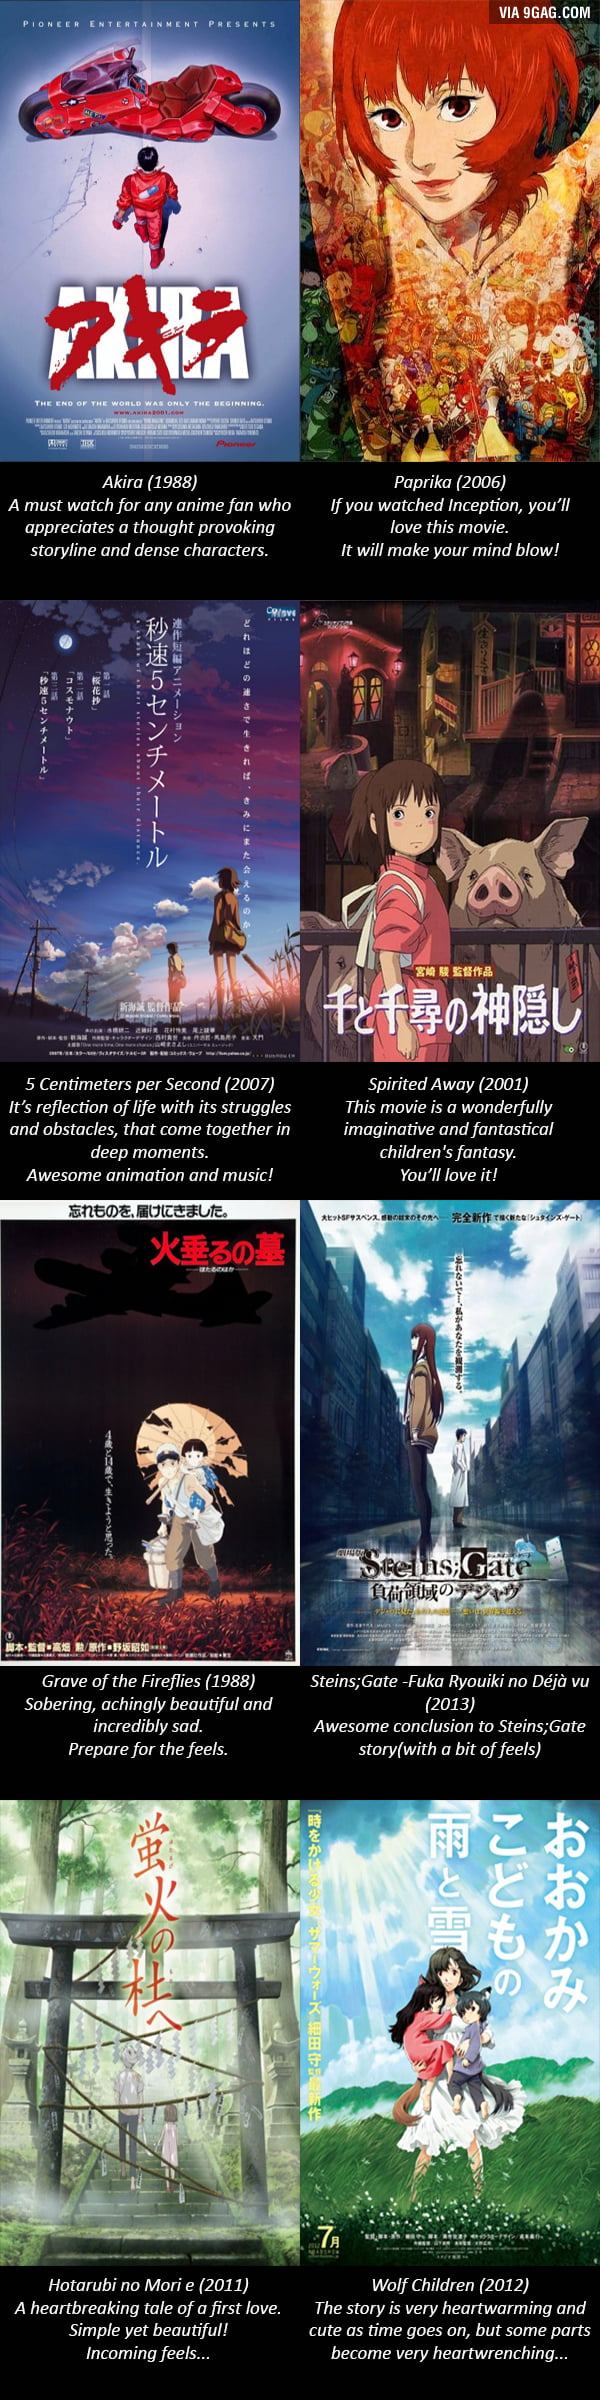 Anime Movies You Must Watch